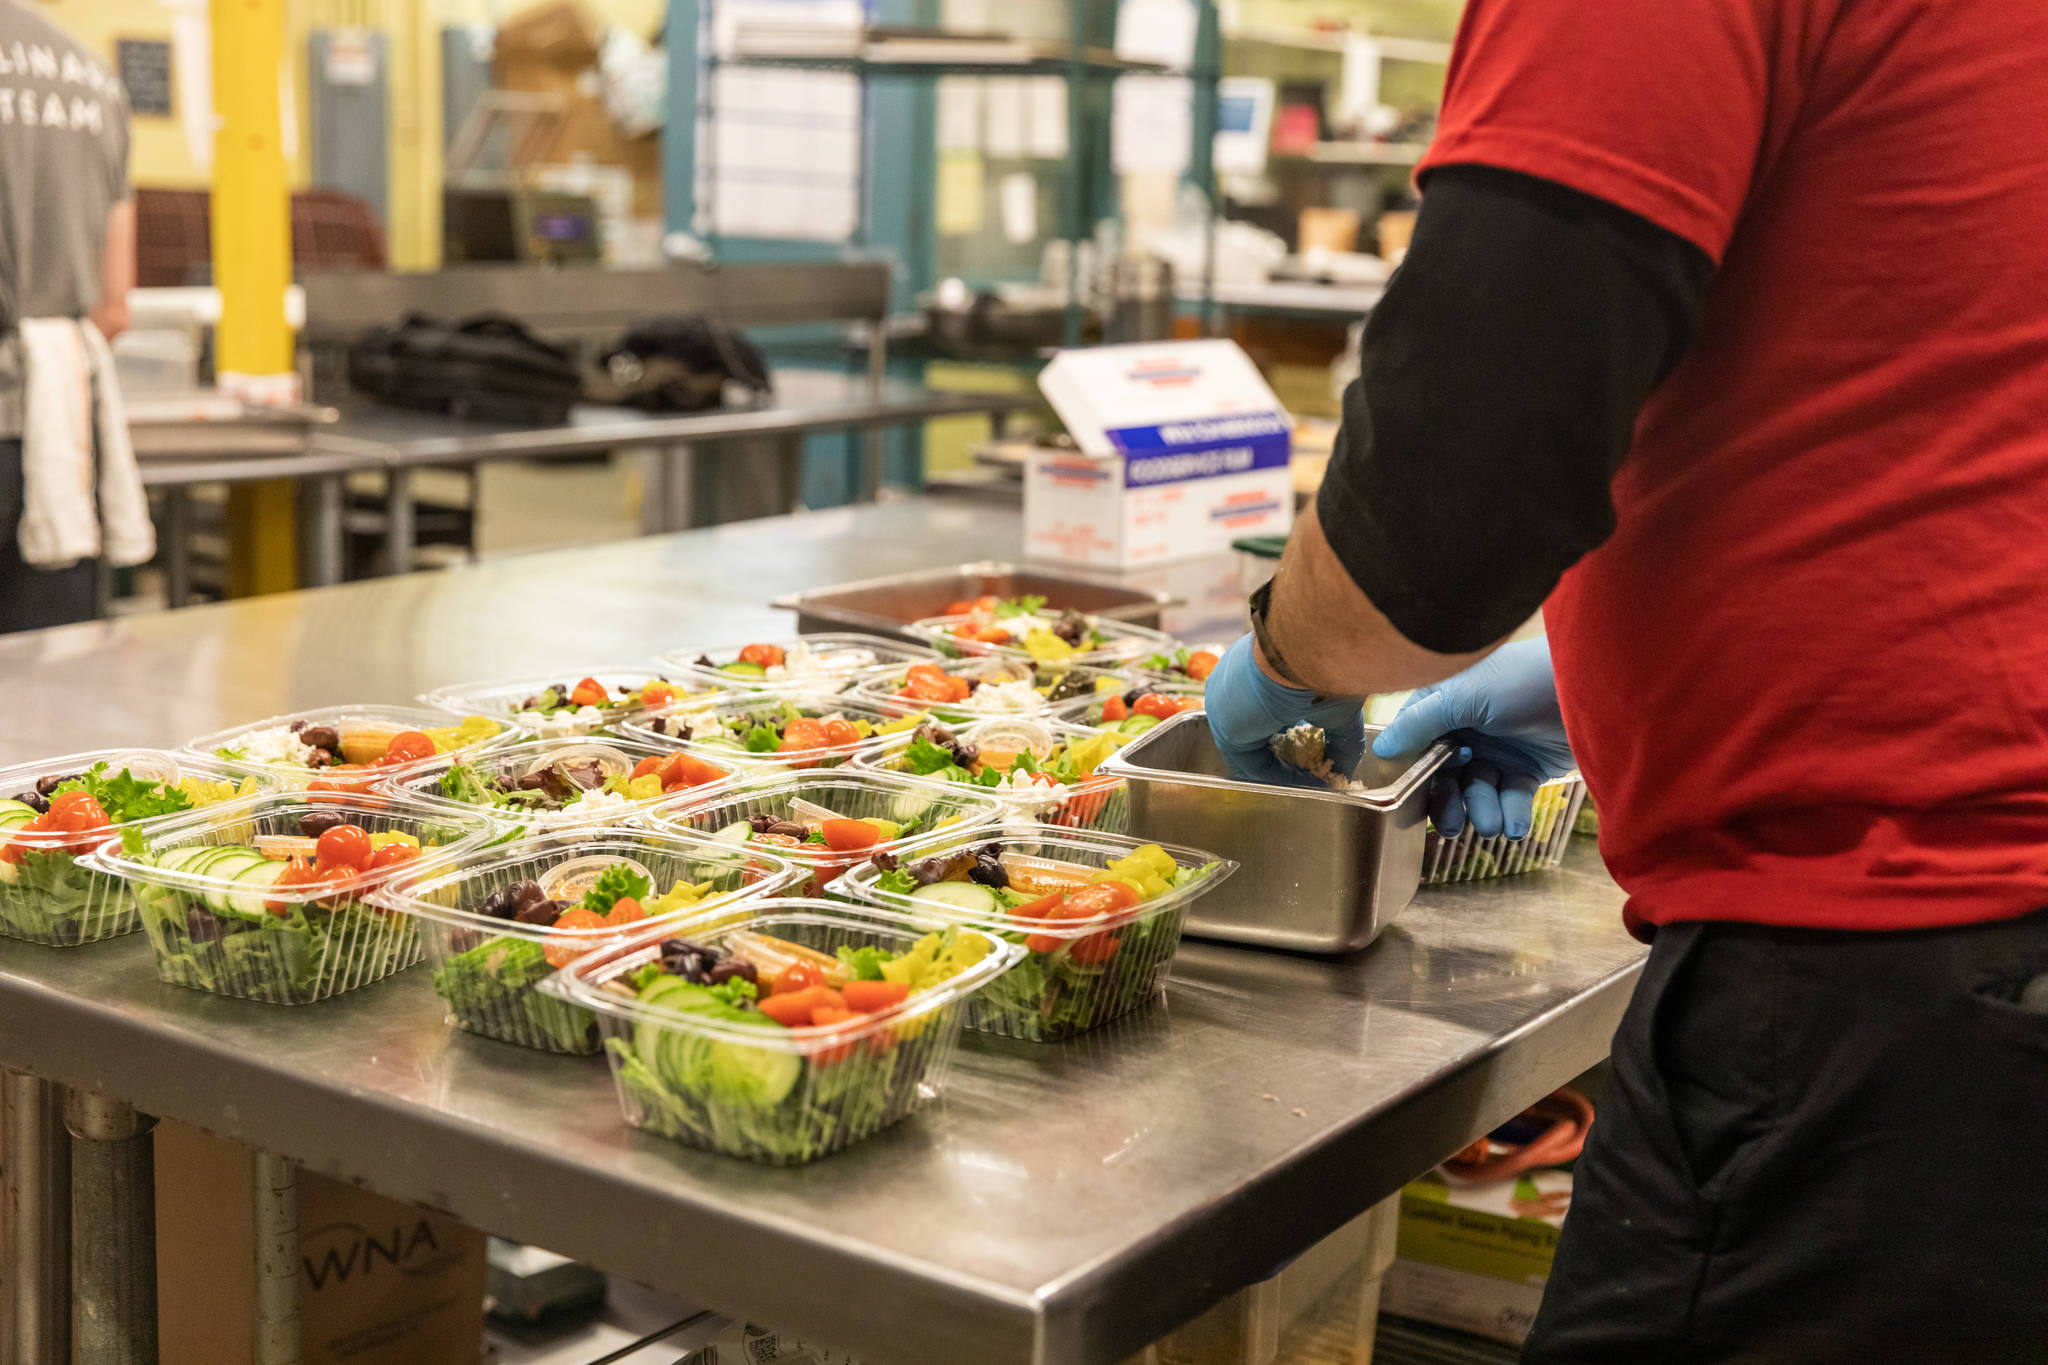 The team at Lisa Dupar Catering has found hearty entree salad and sandwich combinations to be the most effective for the meals they prepare for Medic One Foundation’s Gratitude Meals program. Photo courtesy of Hannah Sheil